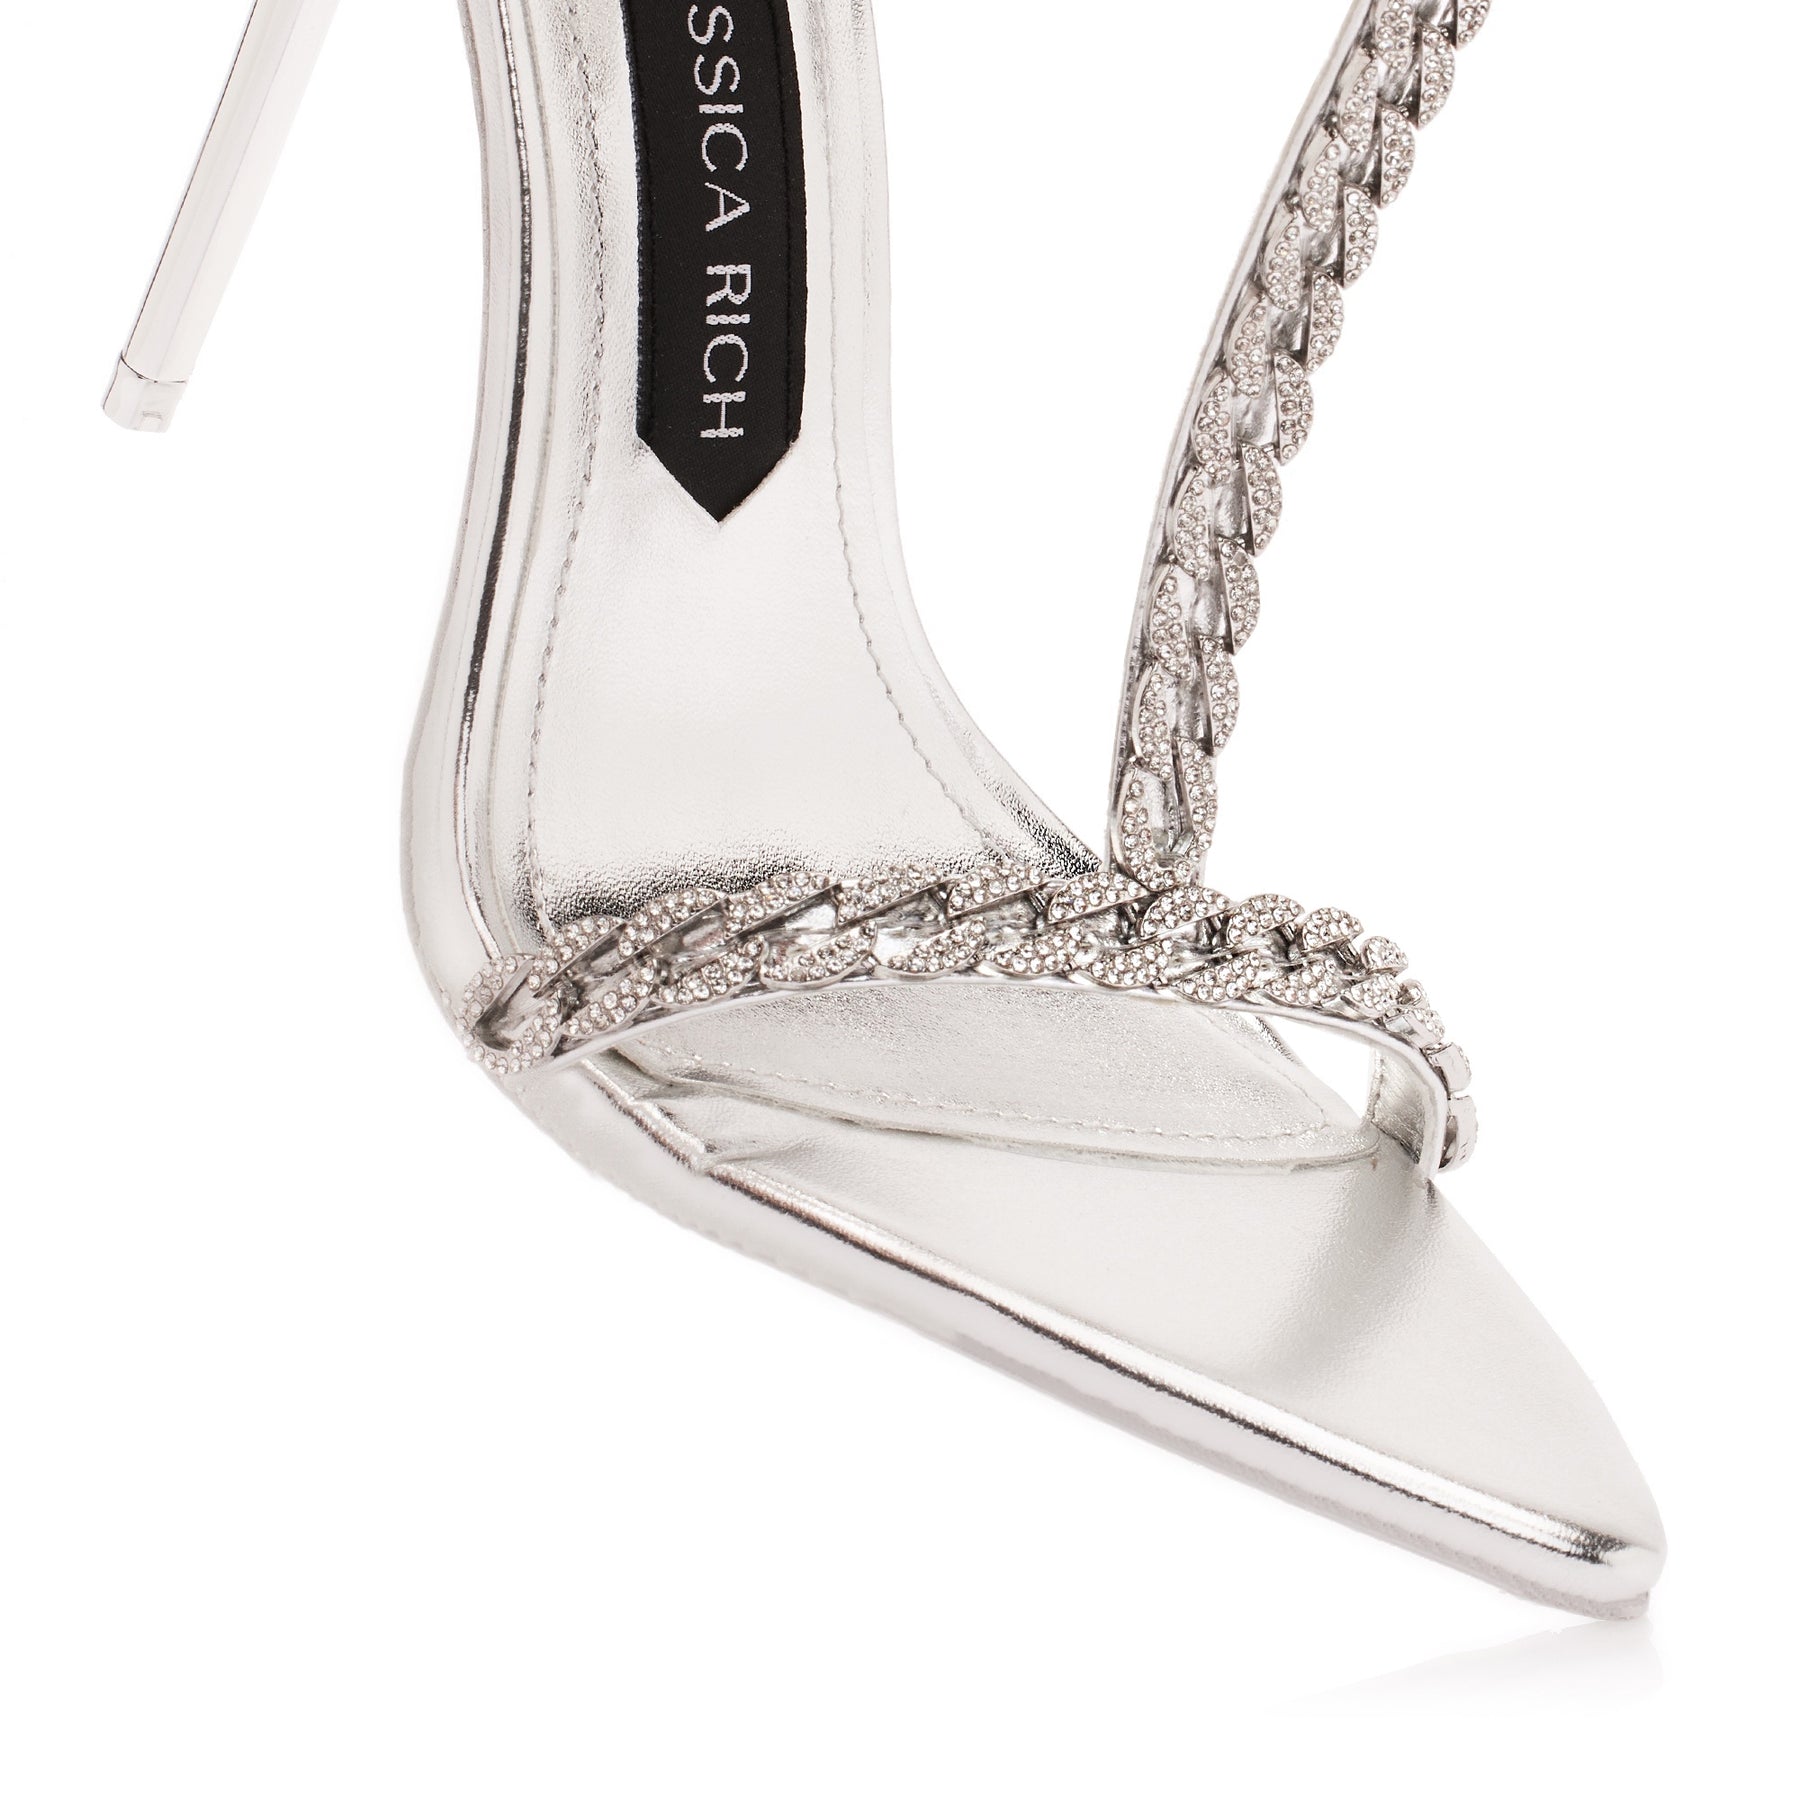 Close up of the Luxe Sandal designer high heels in silver from Jessica Rich.